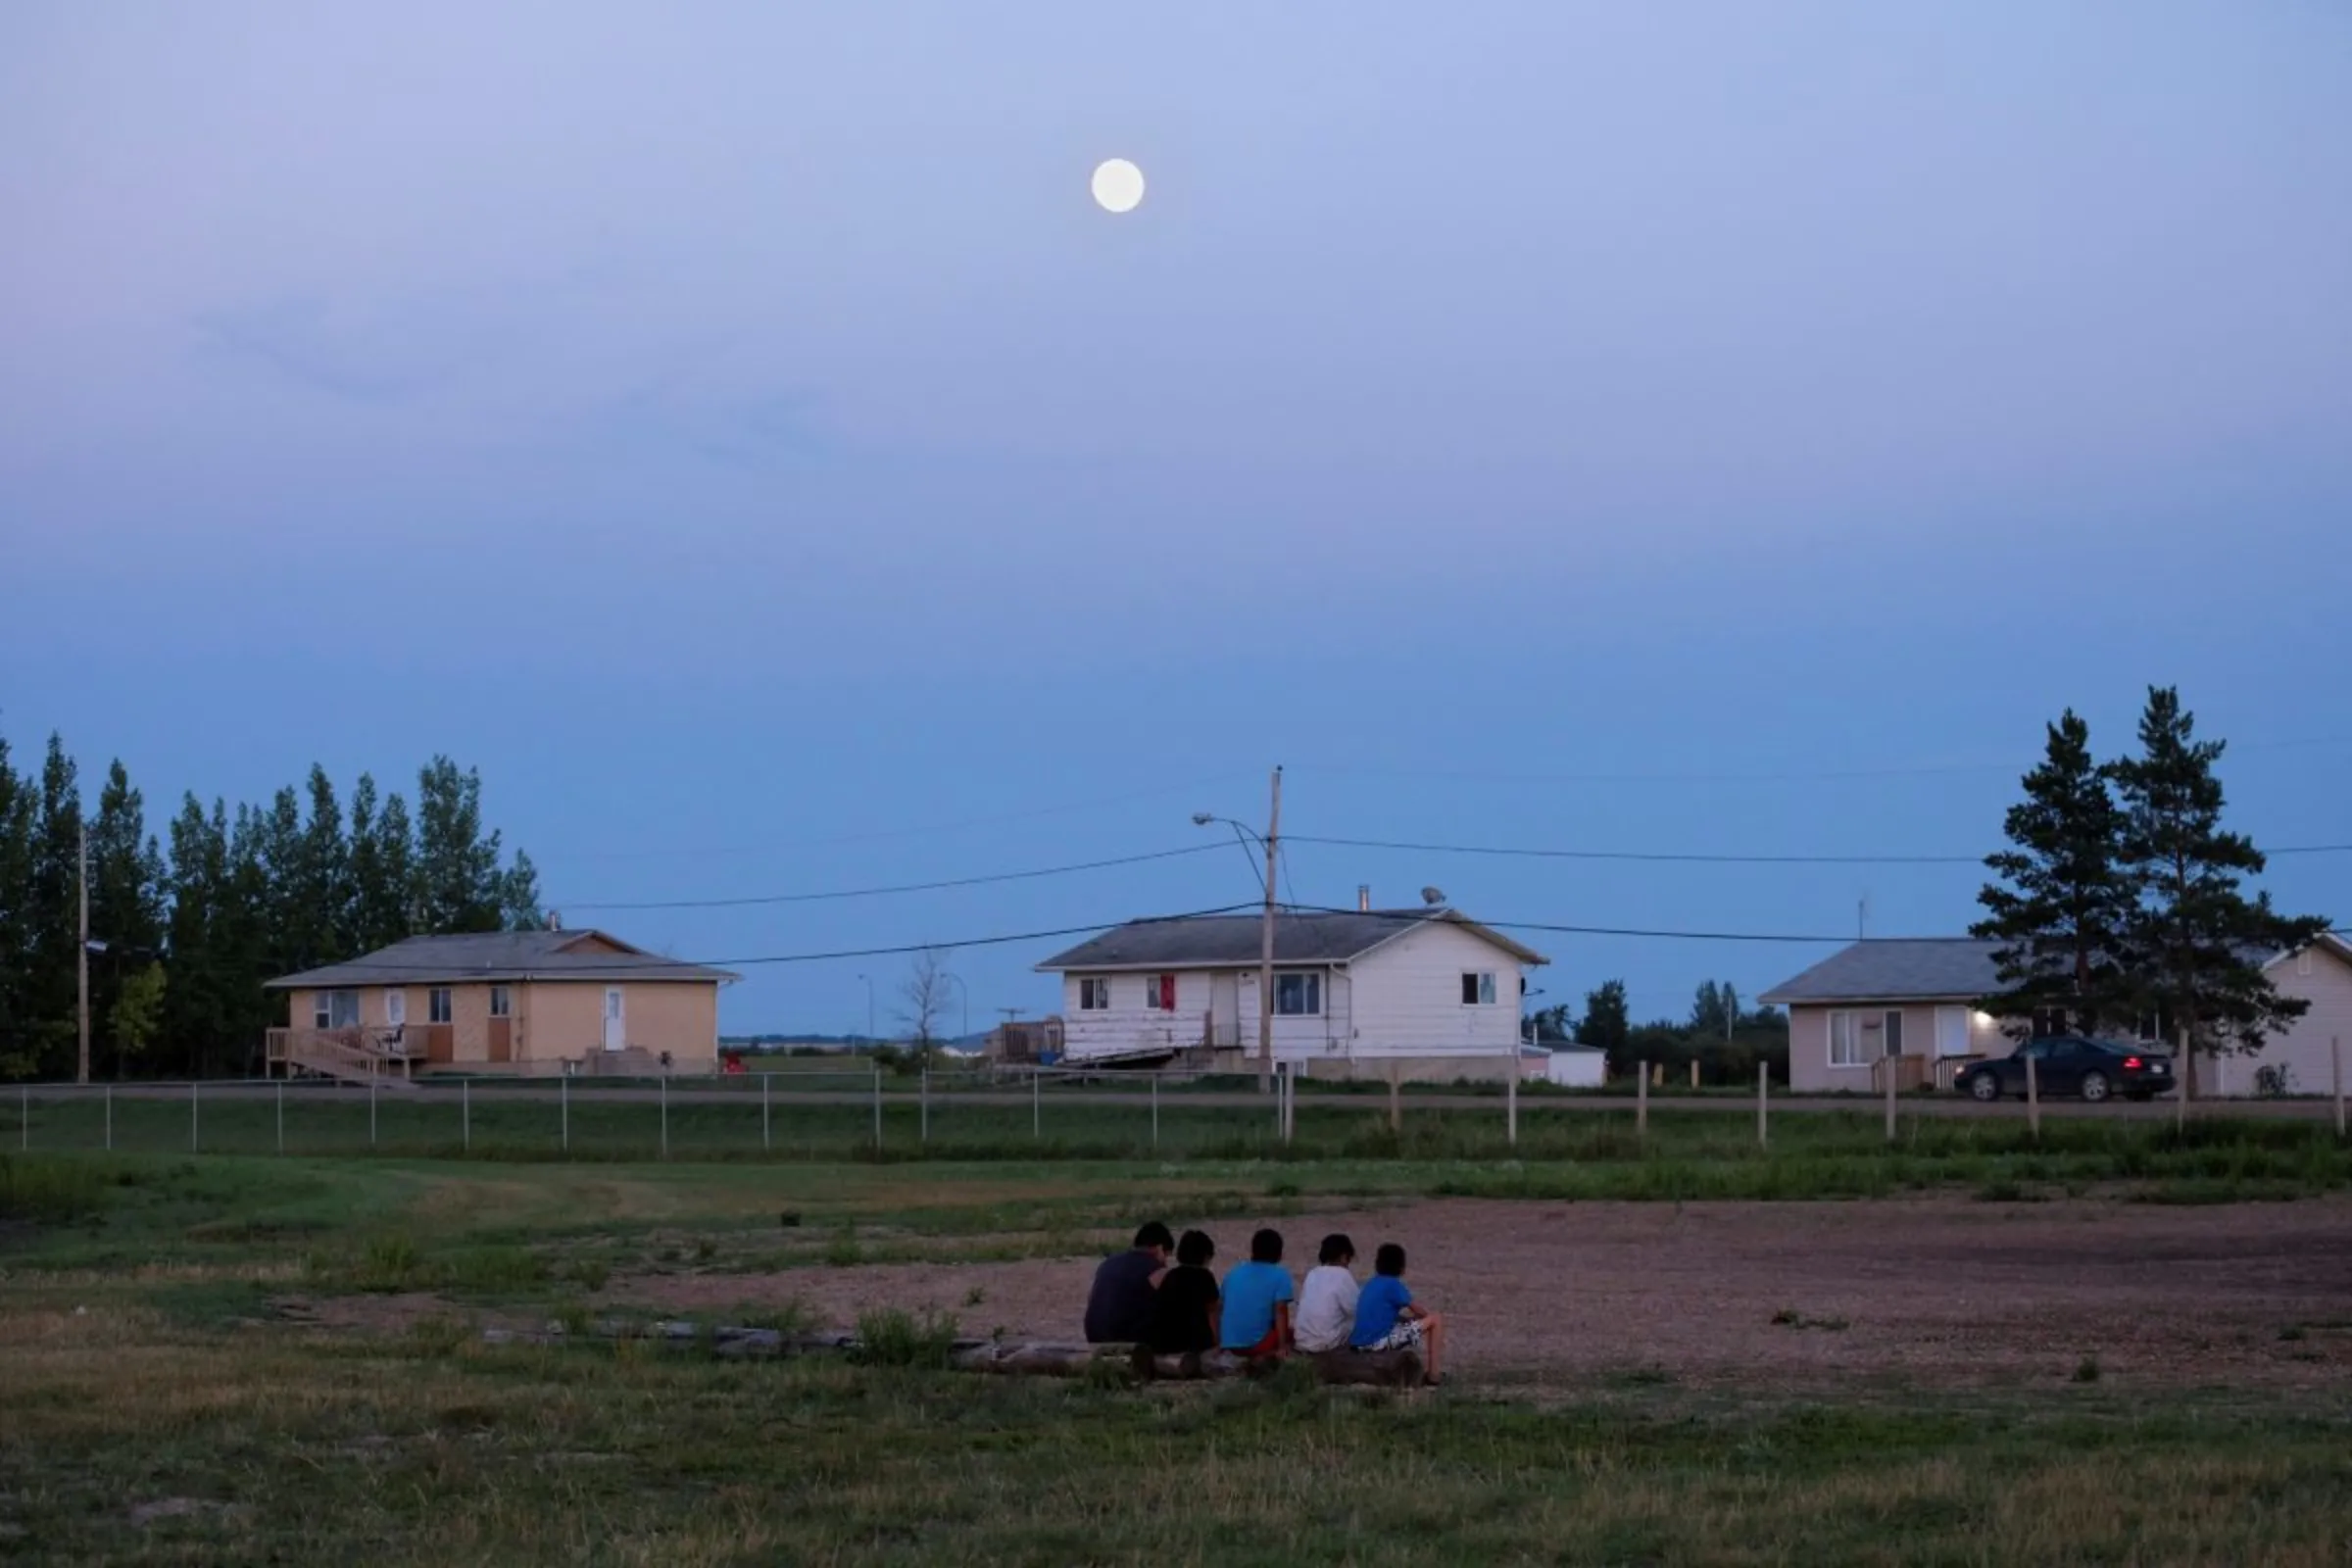 Children from the Cote First Nation sit at the campground set up by the First Nations Indigenous Warriors (FNIW) and the American Indian Movement (AIM) on the Cote First Nation, near the town of Kamsack, Saskatchewan, Canada, August 6, 2017. REUTERS/Zachary Prong